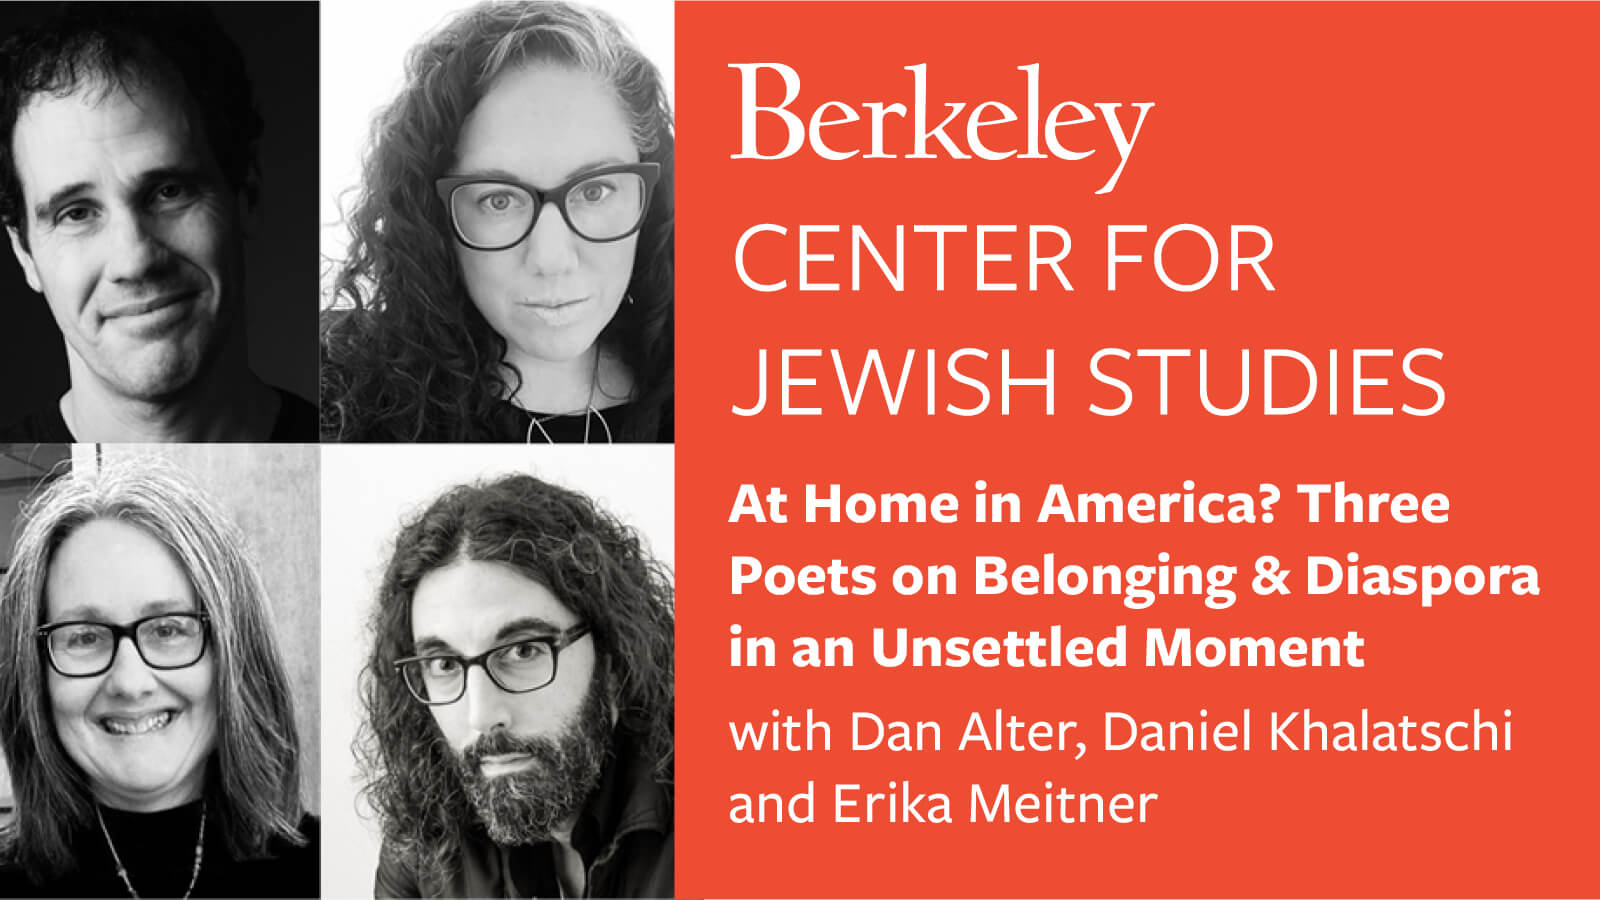 Berkeley Center for Jewish Studies. At Home in America? Three Poets on Belonging & Diaspora in an Unsettled Moment